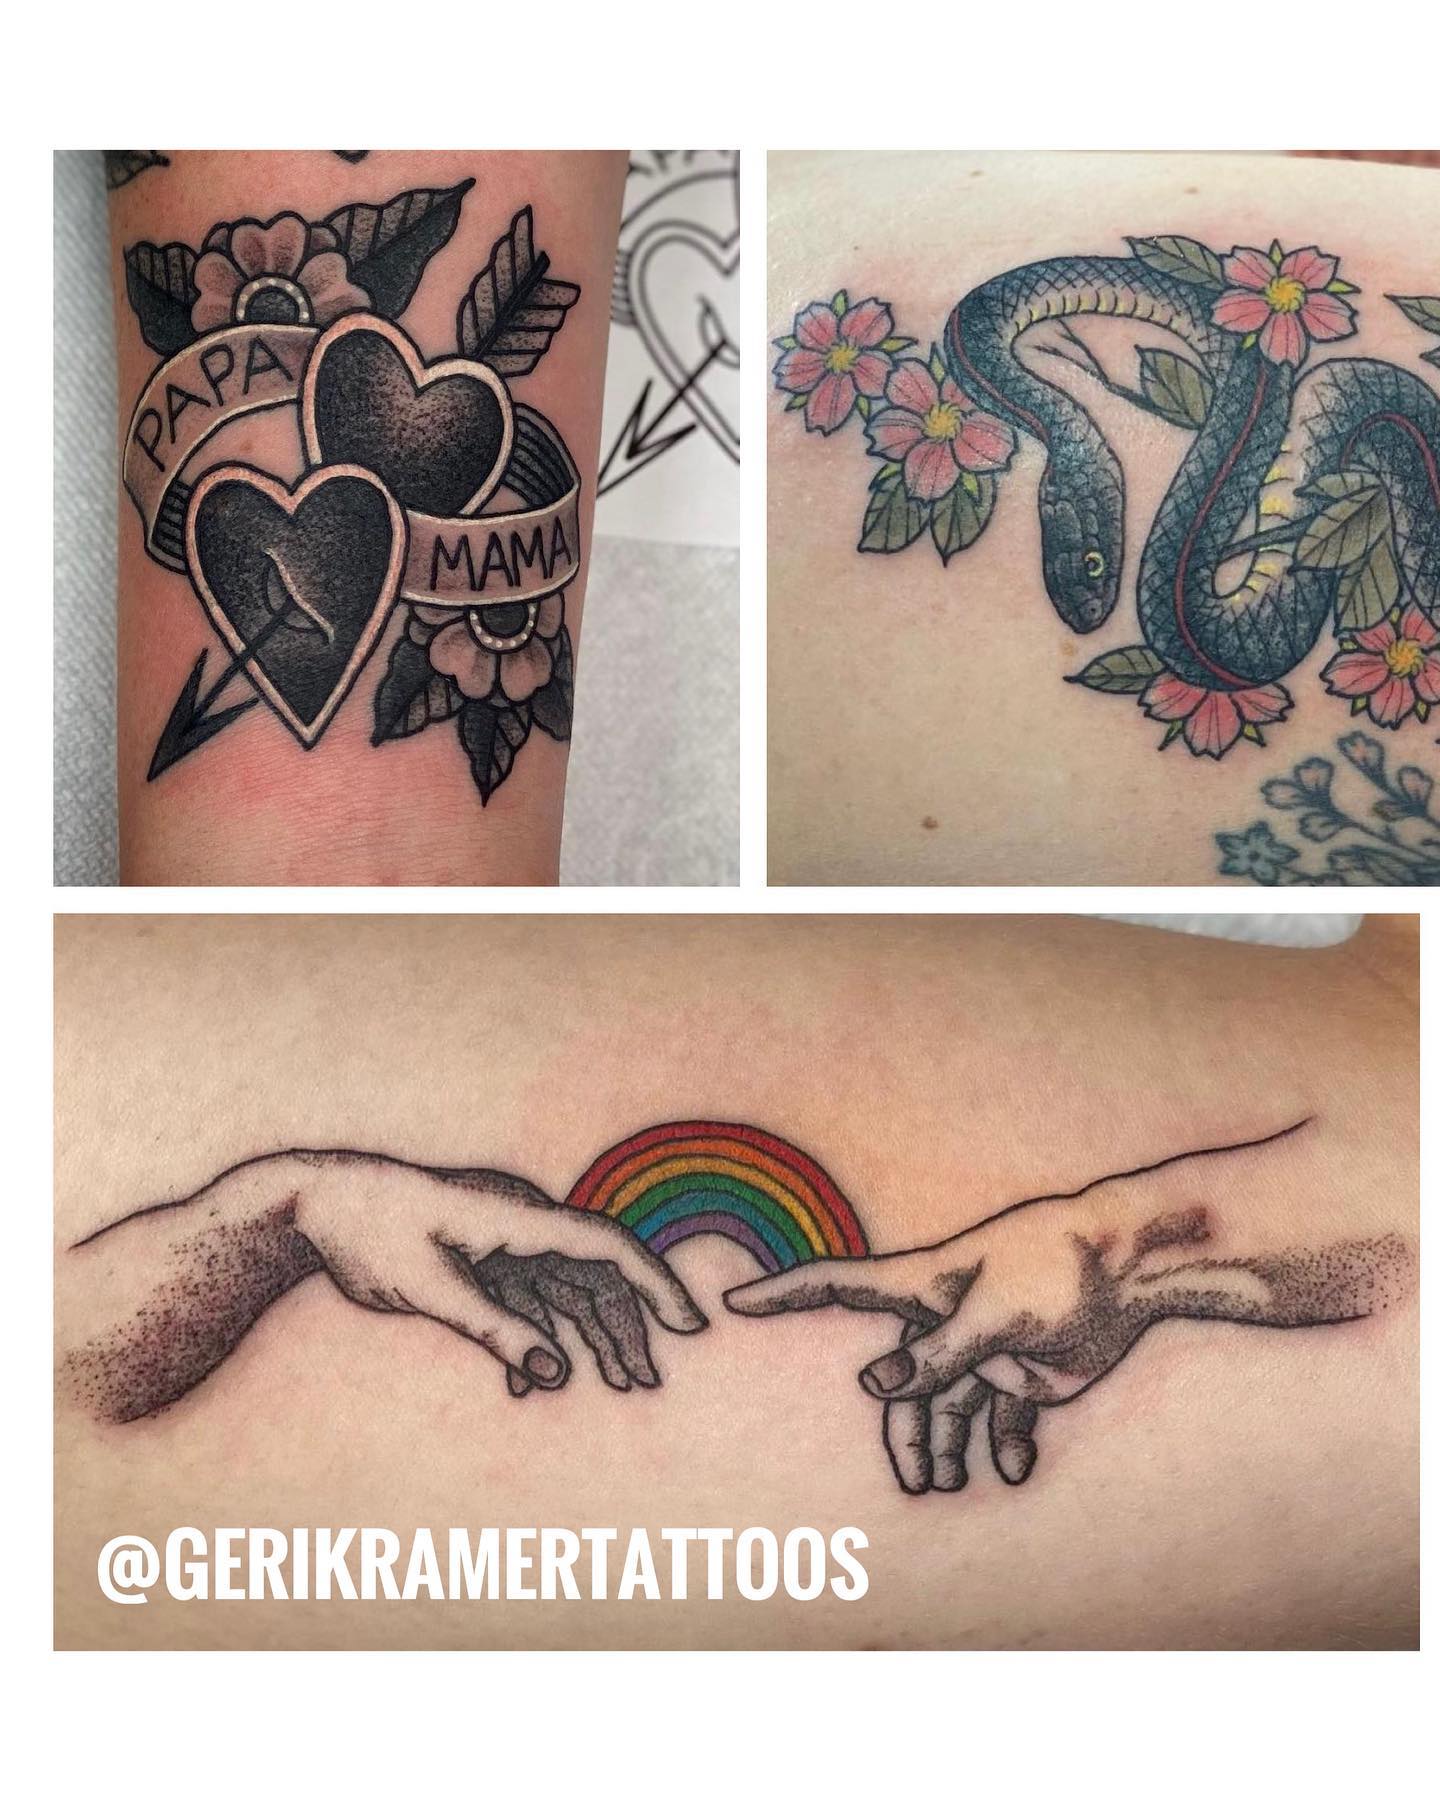 Lots of new followers so we thought we would do some introductions!! This is @gerikramertattoos Owner/Operator of Tattoo Zoo (pronouns SHE/HER) Geri loves the challenge of covering up older or poorly done tattoos and turning your frown upside down. She also loves collaborating with her clients and loves tattooing botanicals, snakes, insects actually anything nature related … 🪴 Each artist at Tattoo Zoo books their own appointments - so check bio for information. Geri’s books are currently closed but will open in the new year. Click link in her bio to join her mailing list so you can be the first to know when they are taking on new appointments.